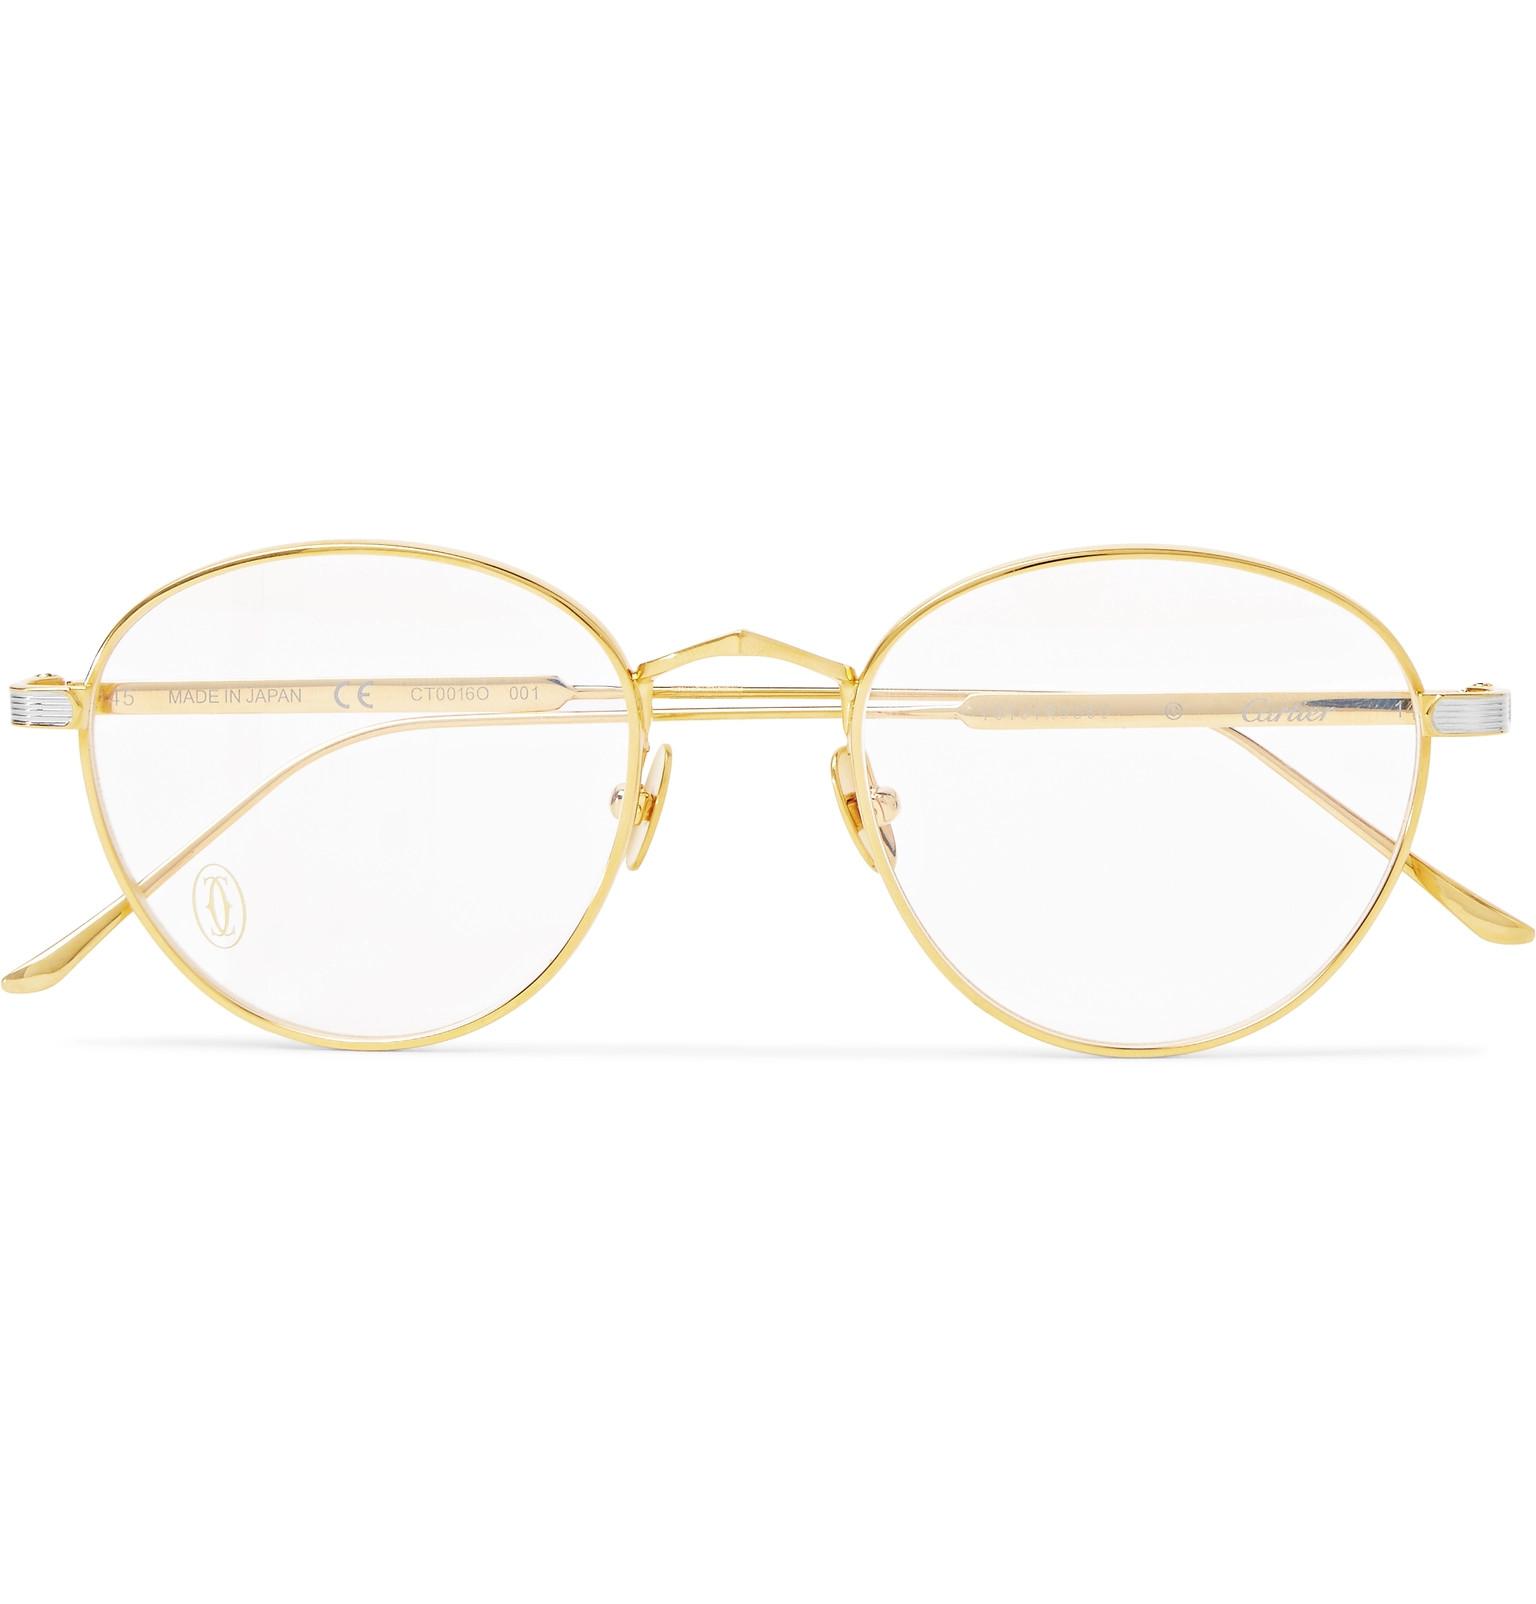 Cartier Signature C De Cartier Round-frame Gold And Silver-tone Optical  Glasses in Metallic for Men - Lyst